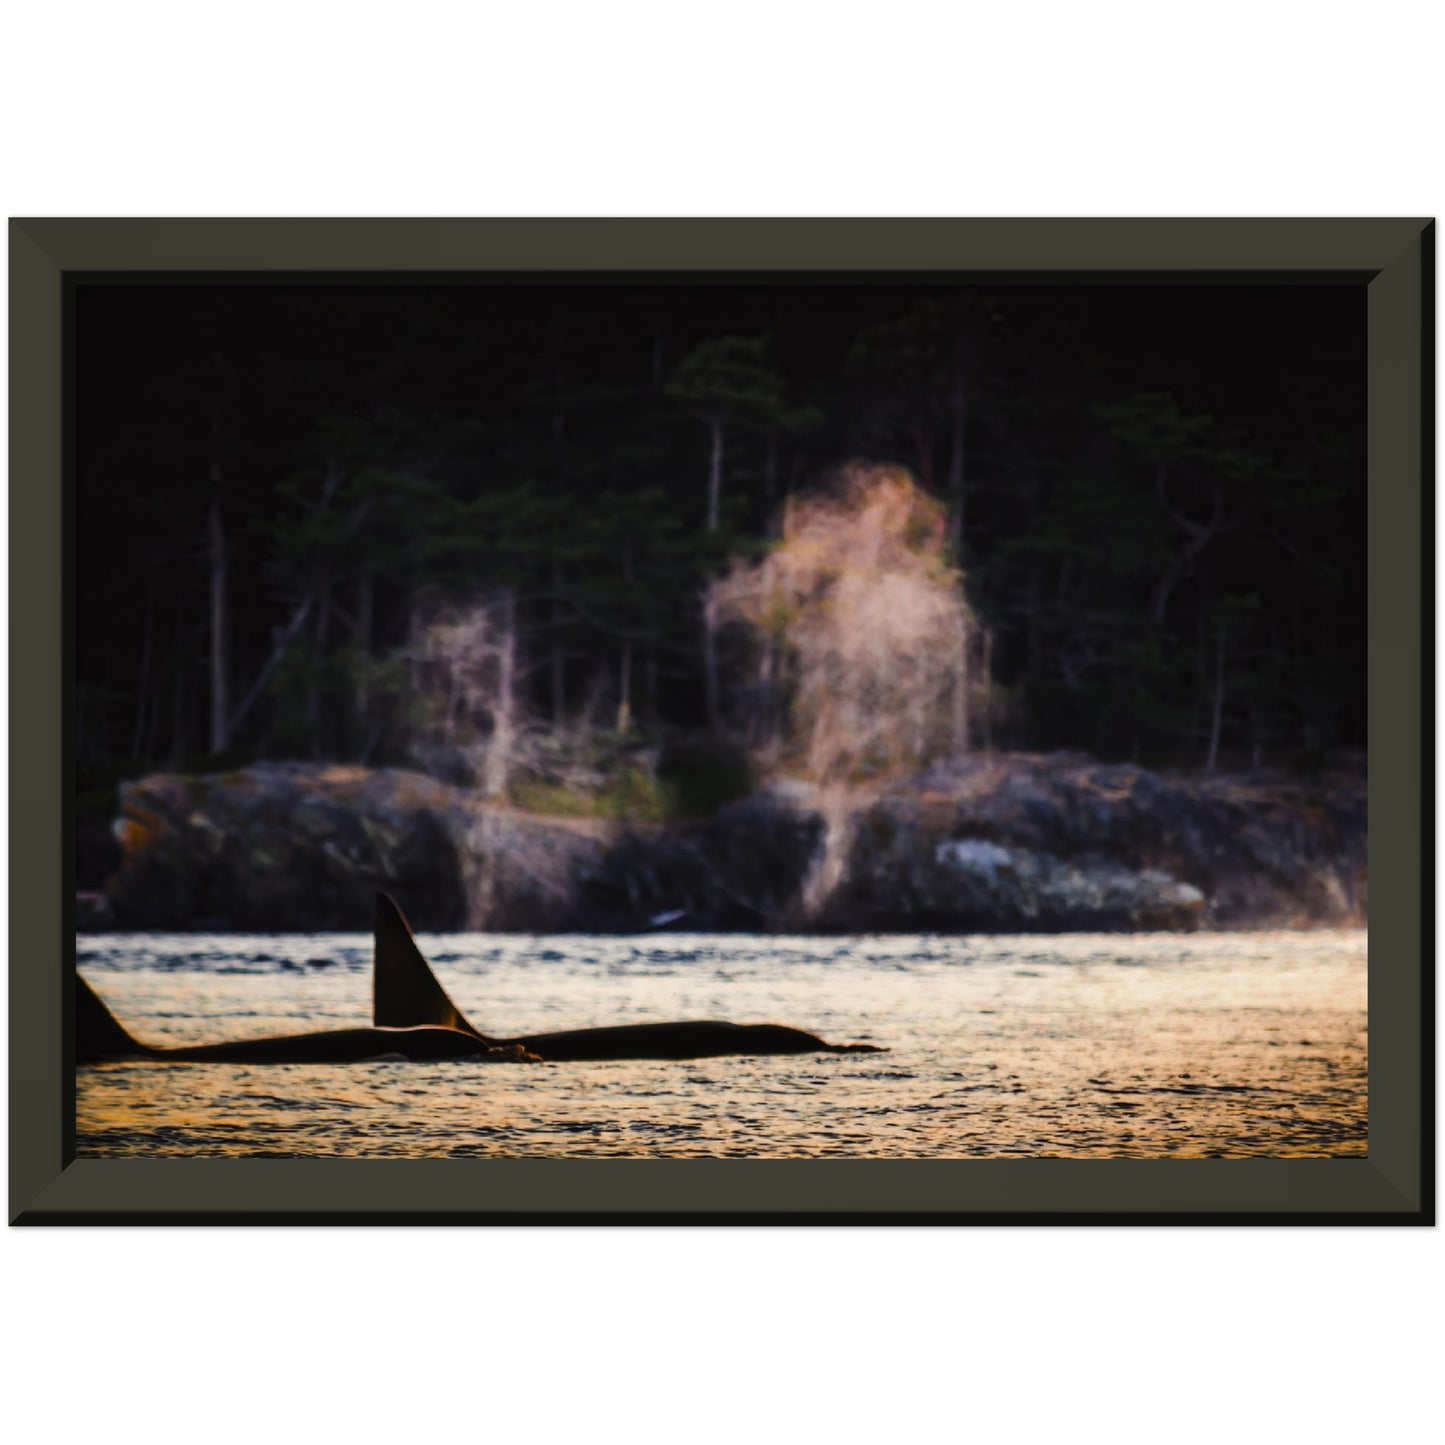 Exhale - Museum-Quality Matte Paper Metal Framed Poster